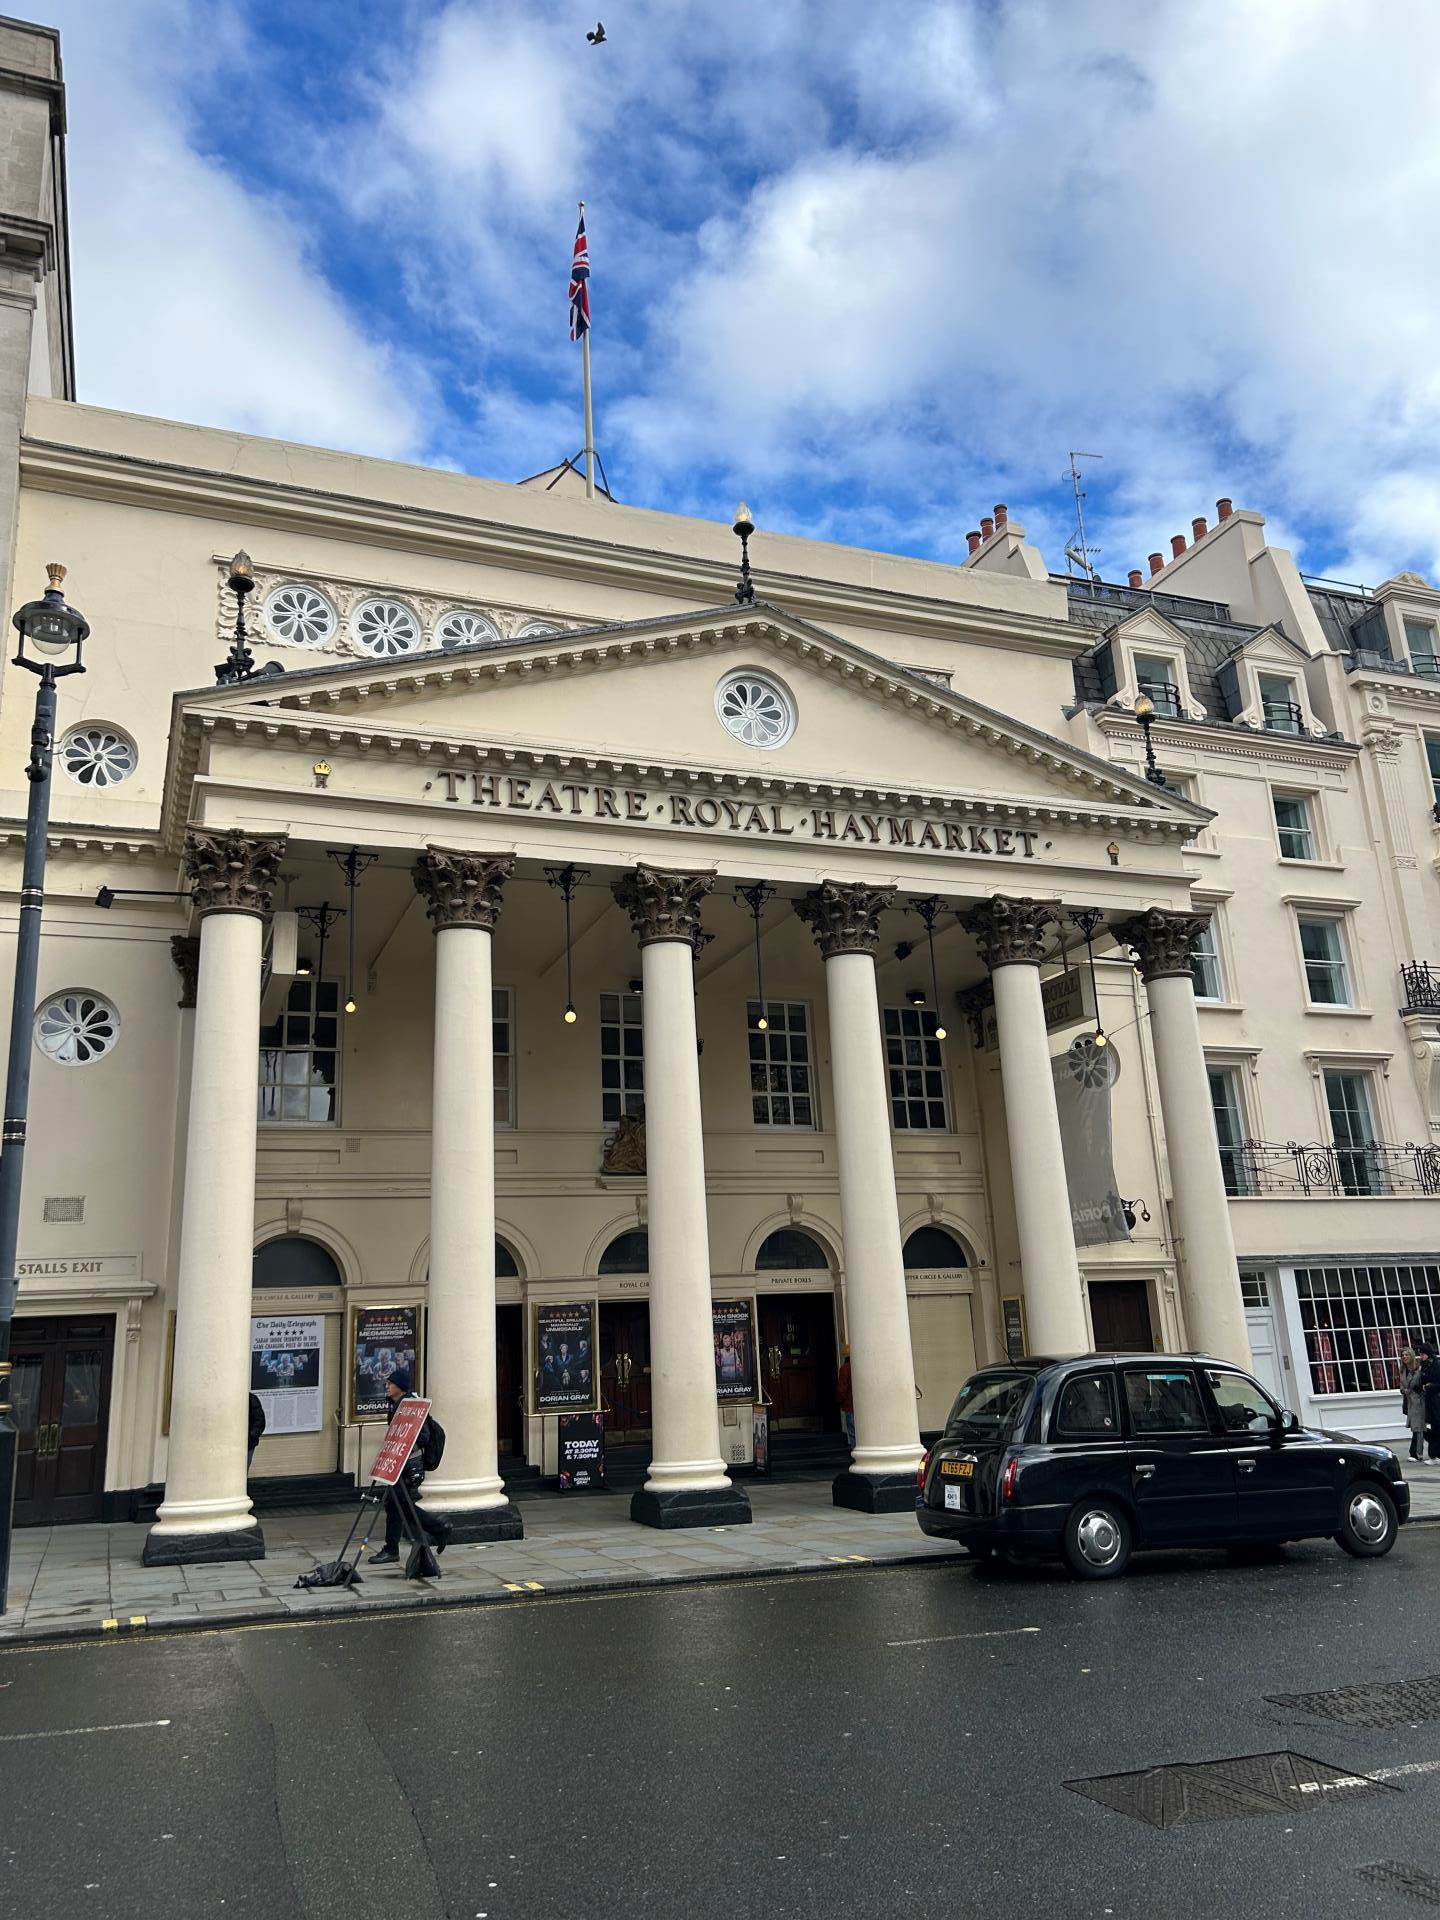 Picture of the Theatre Royal Haymarket exterior